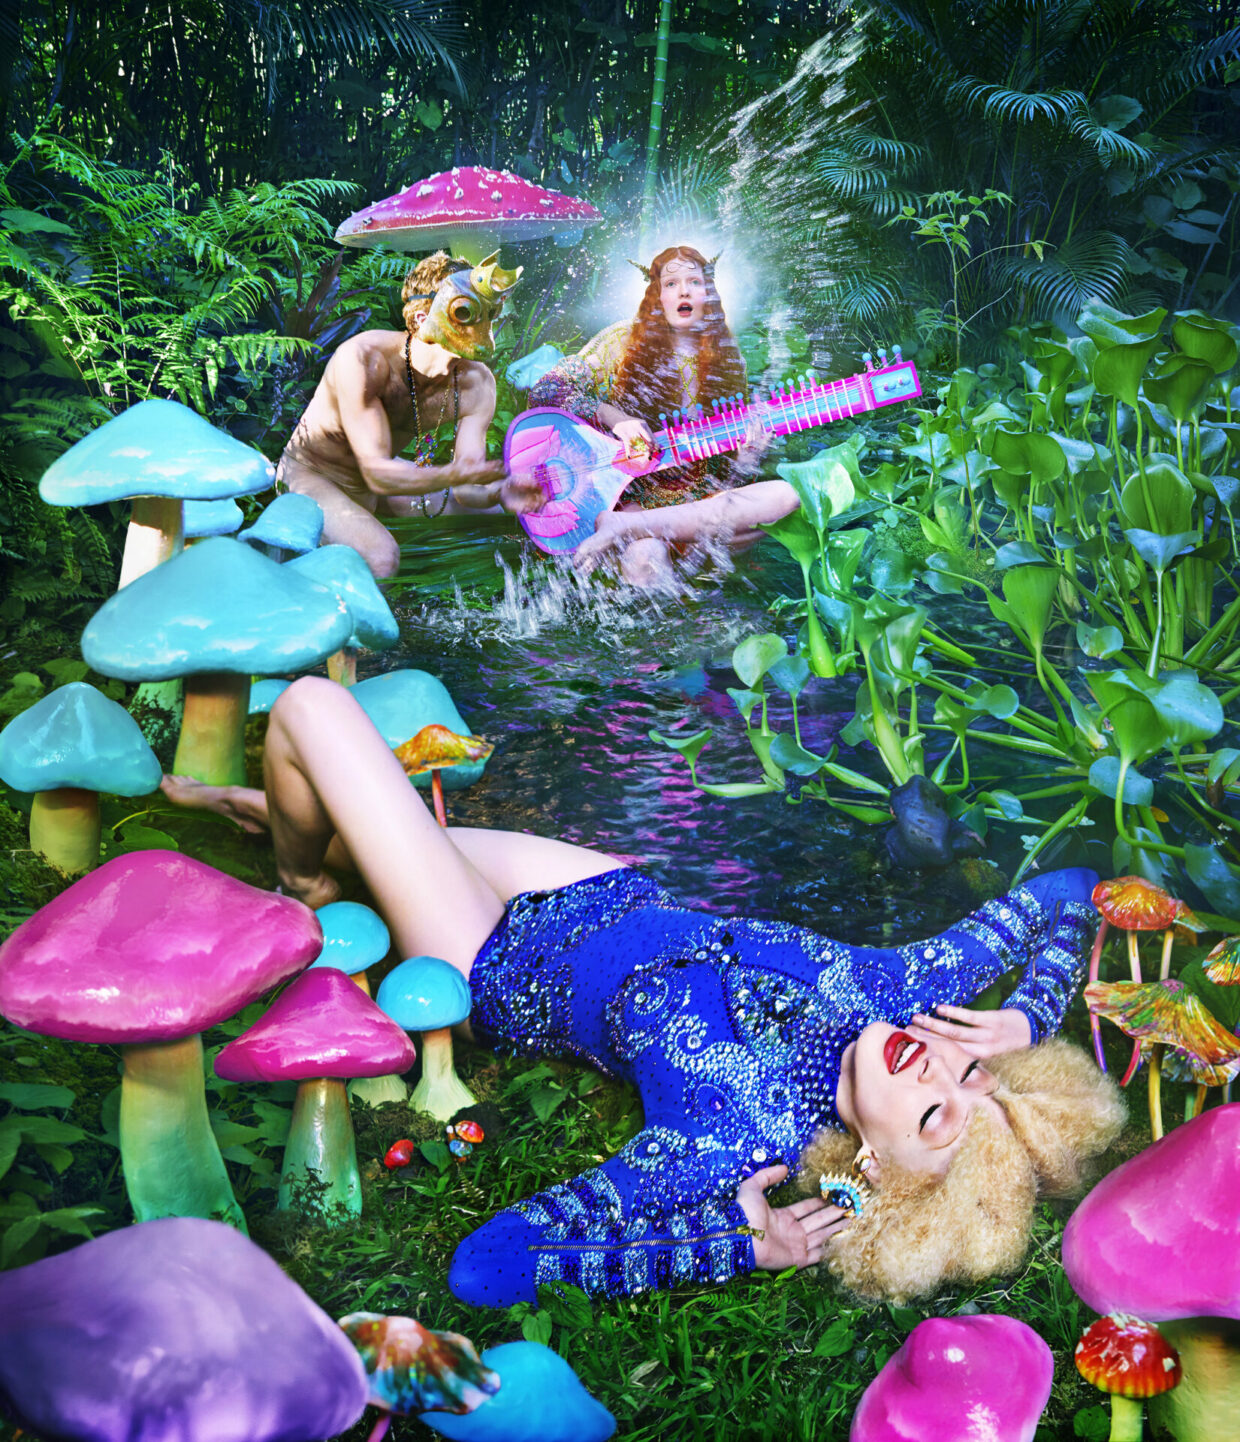 David LaChapelle on Climate Change and His 2020 Lavazza Calendar | 4